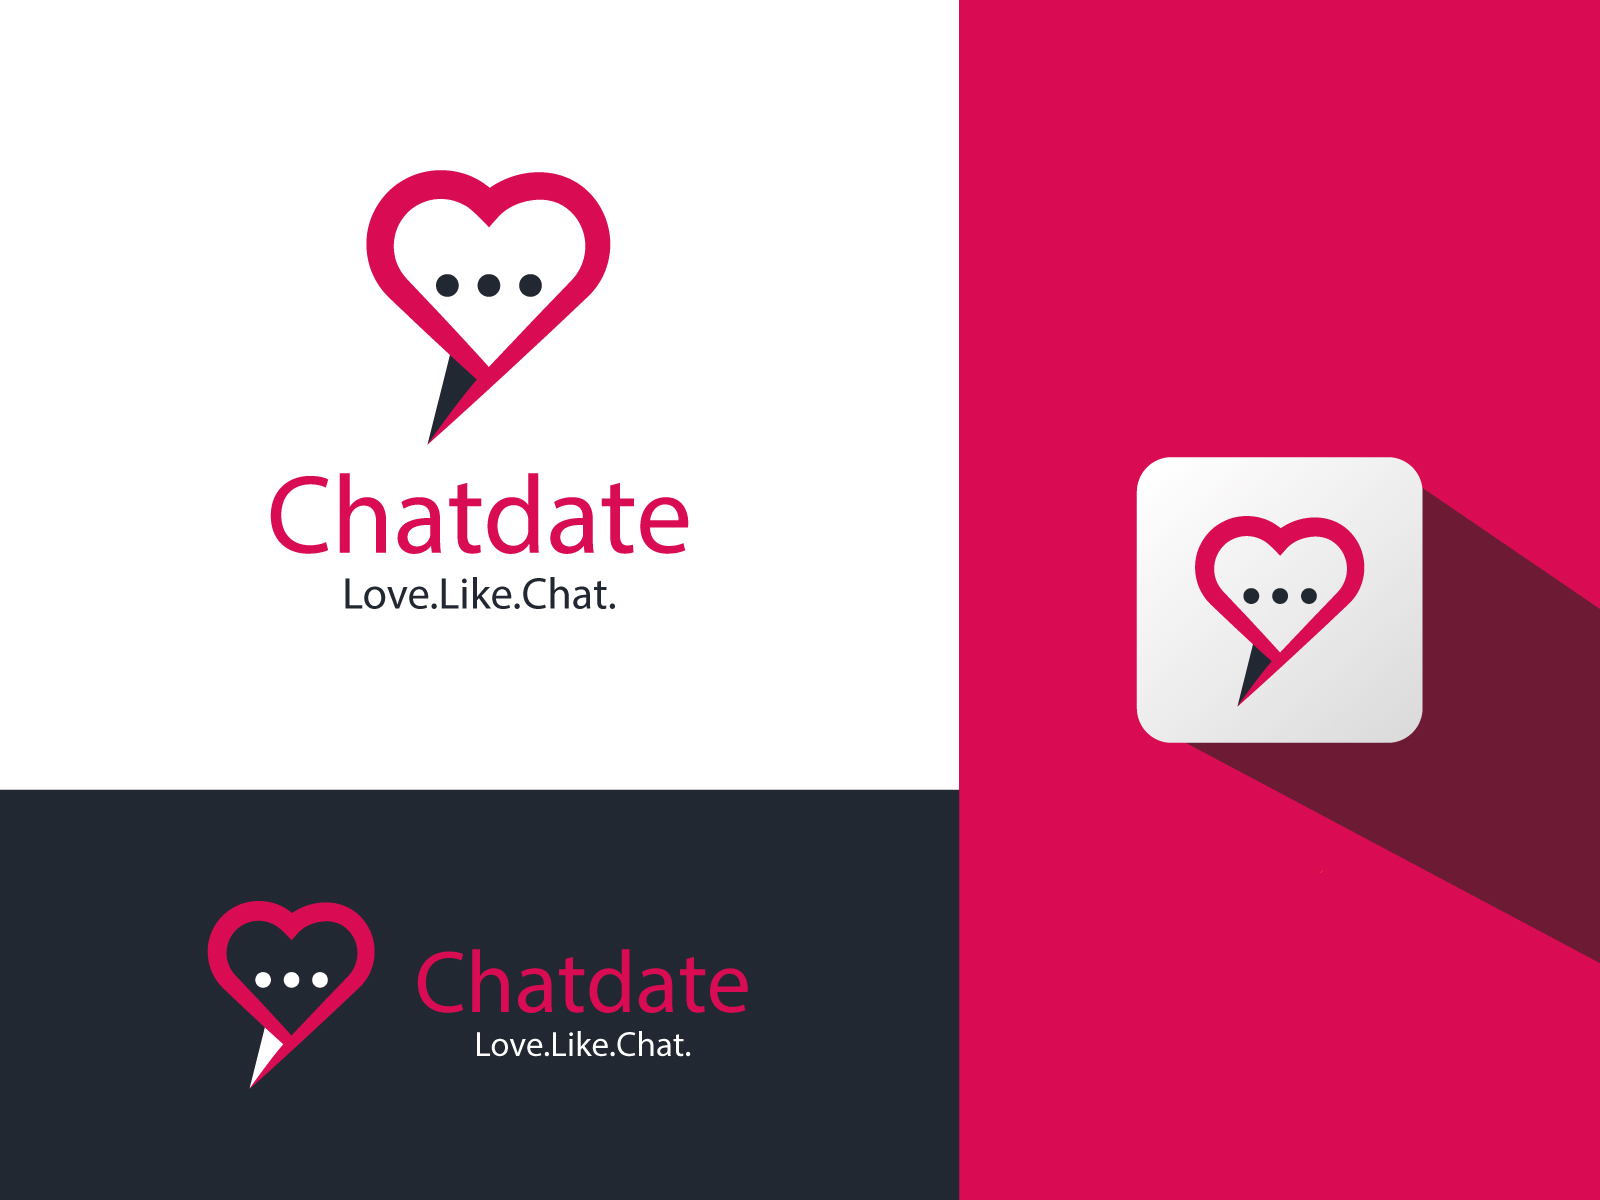 Chatdate